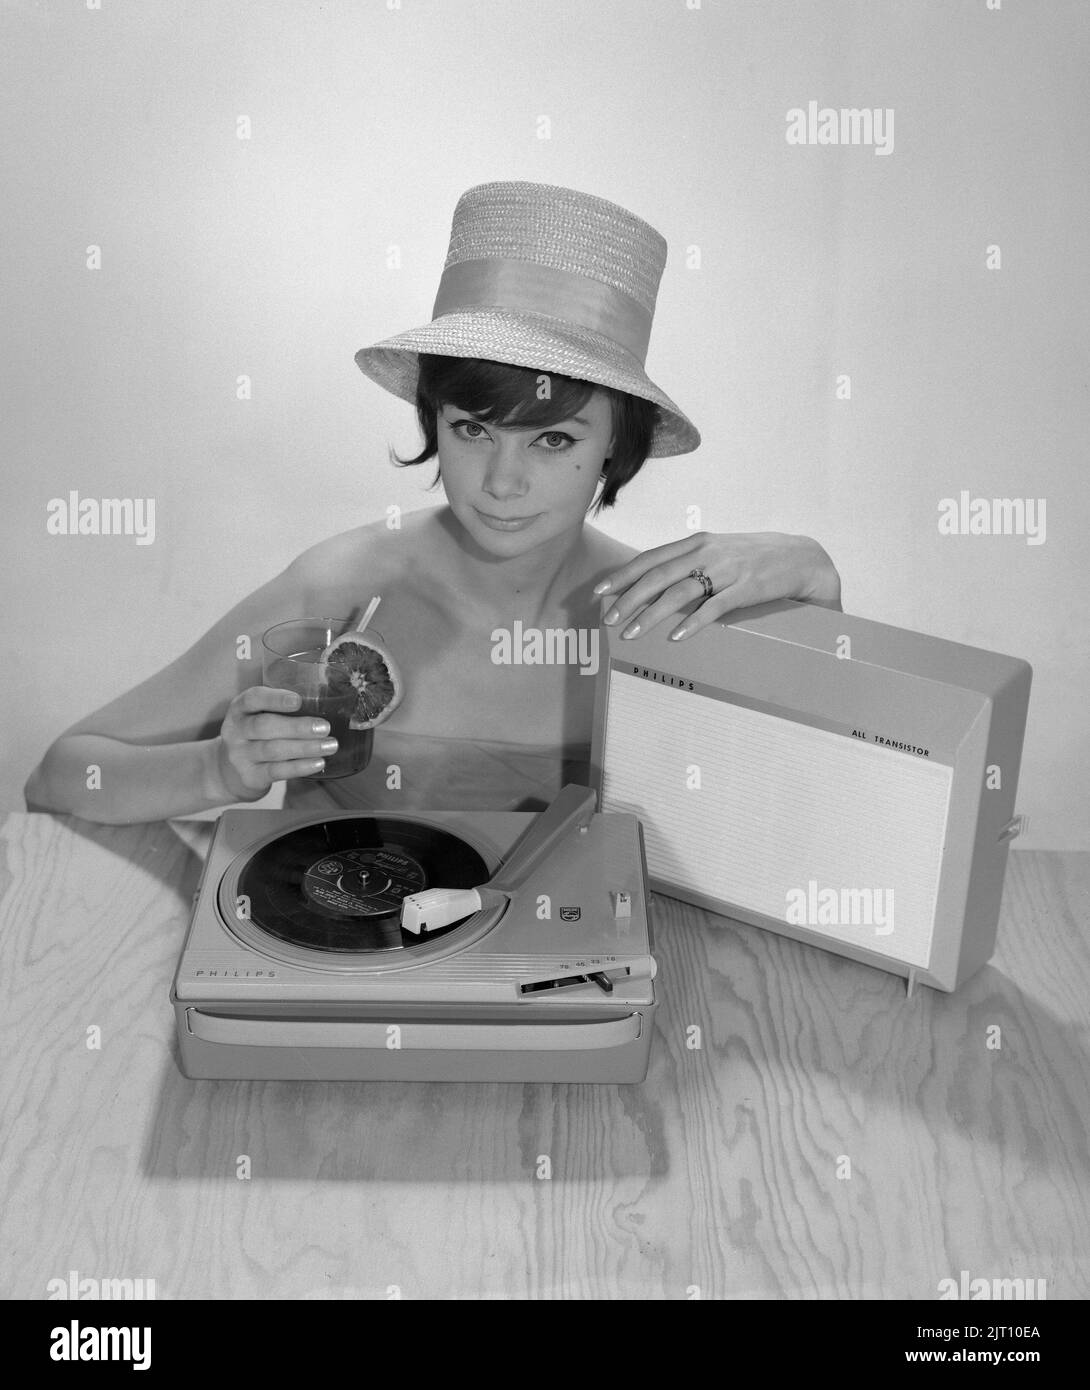 1960s lifestyle. A young woman with a Philips radio and a gramophone as it could look in the summer. The summer hat and the cool drink glass is in the picture to get the right summer feeling. Sweden 1960s Photo Kristoffersson Ref 374A Stock Photo